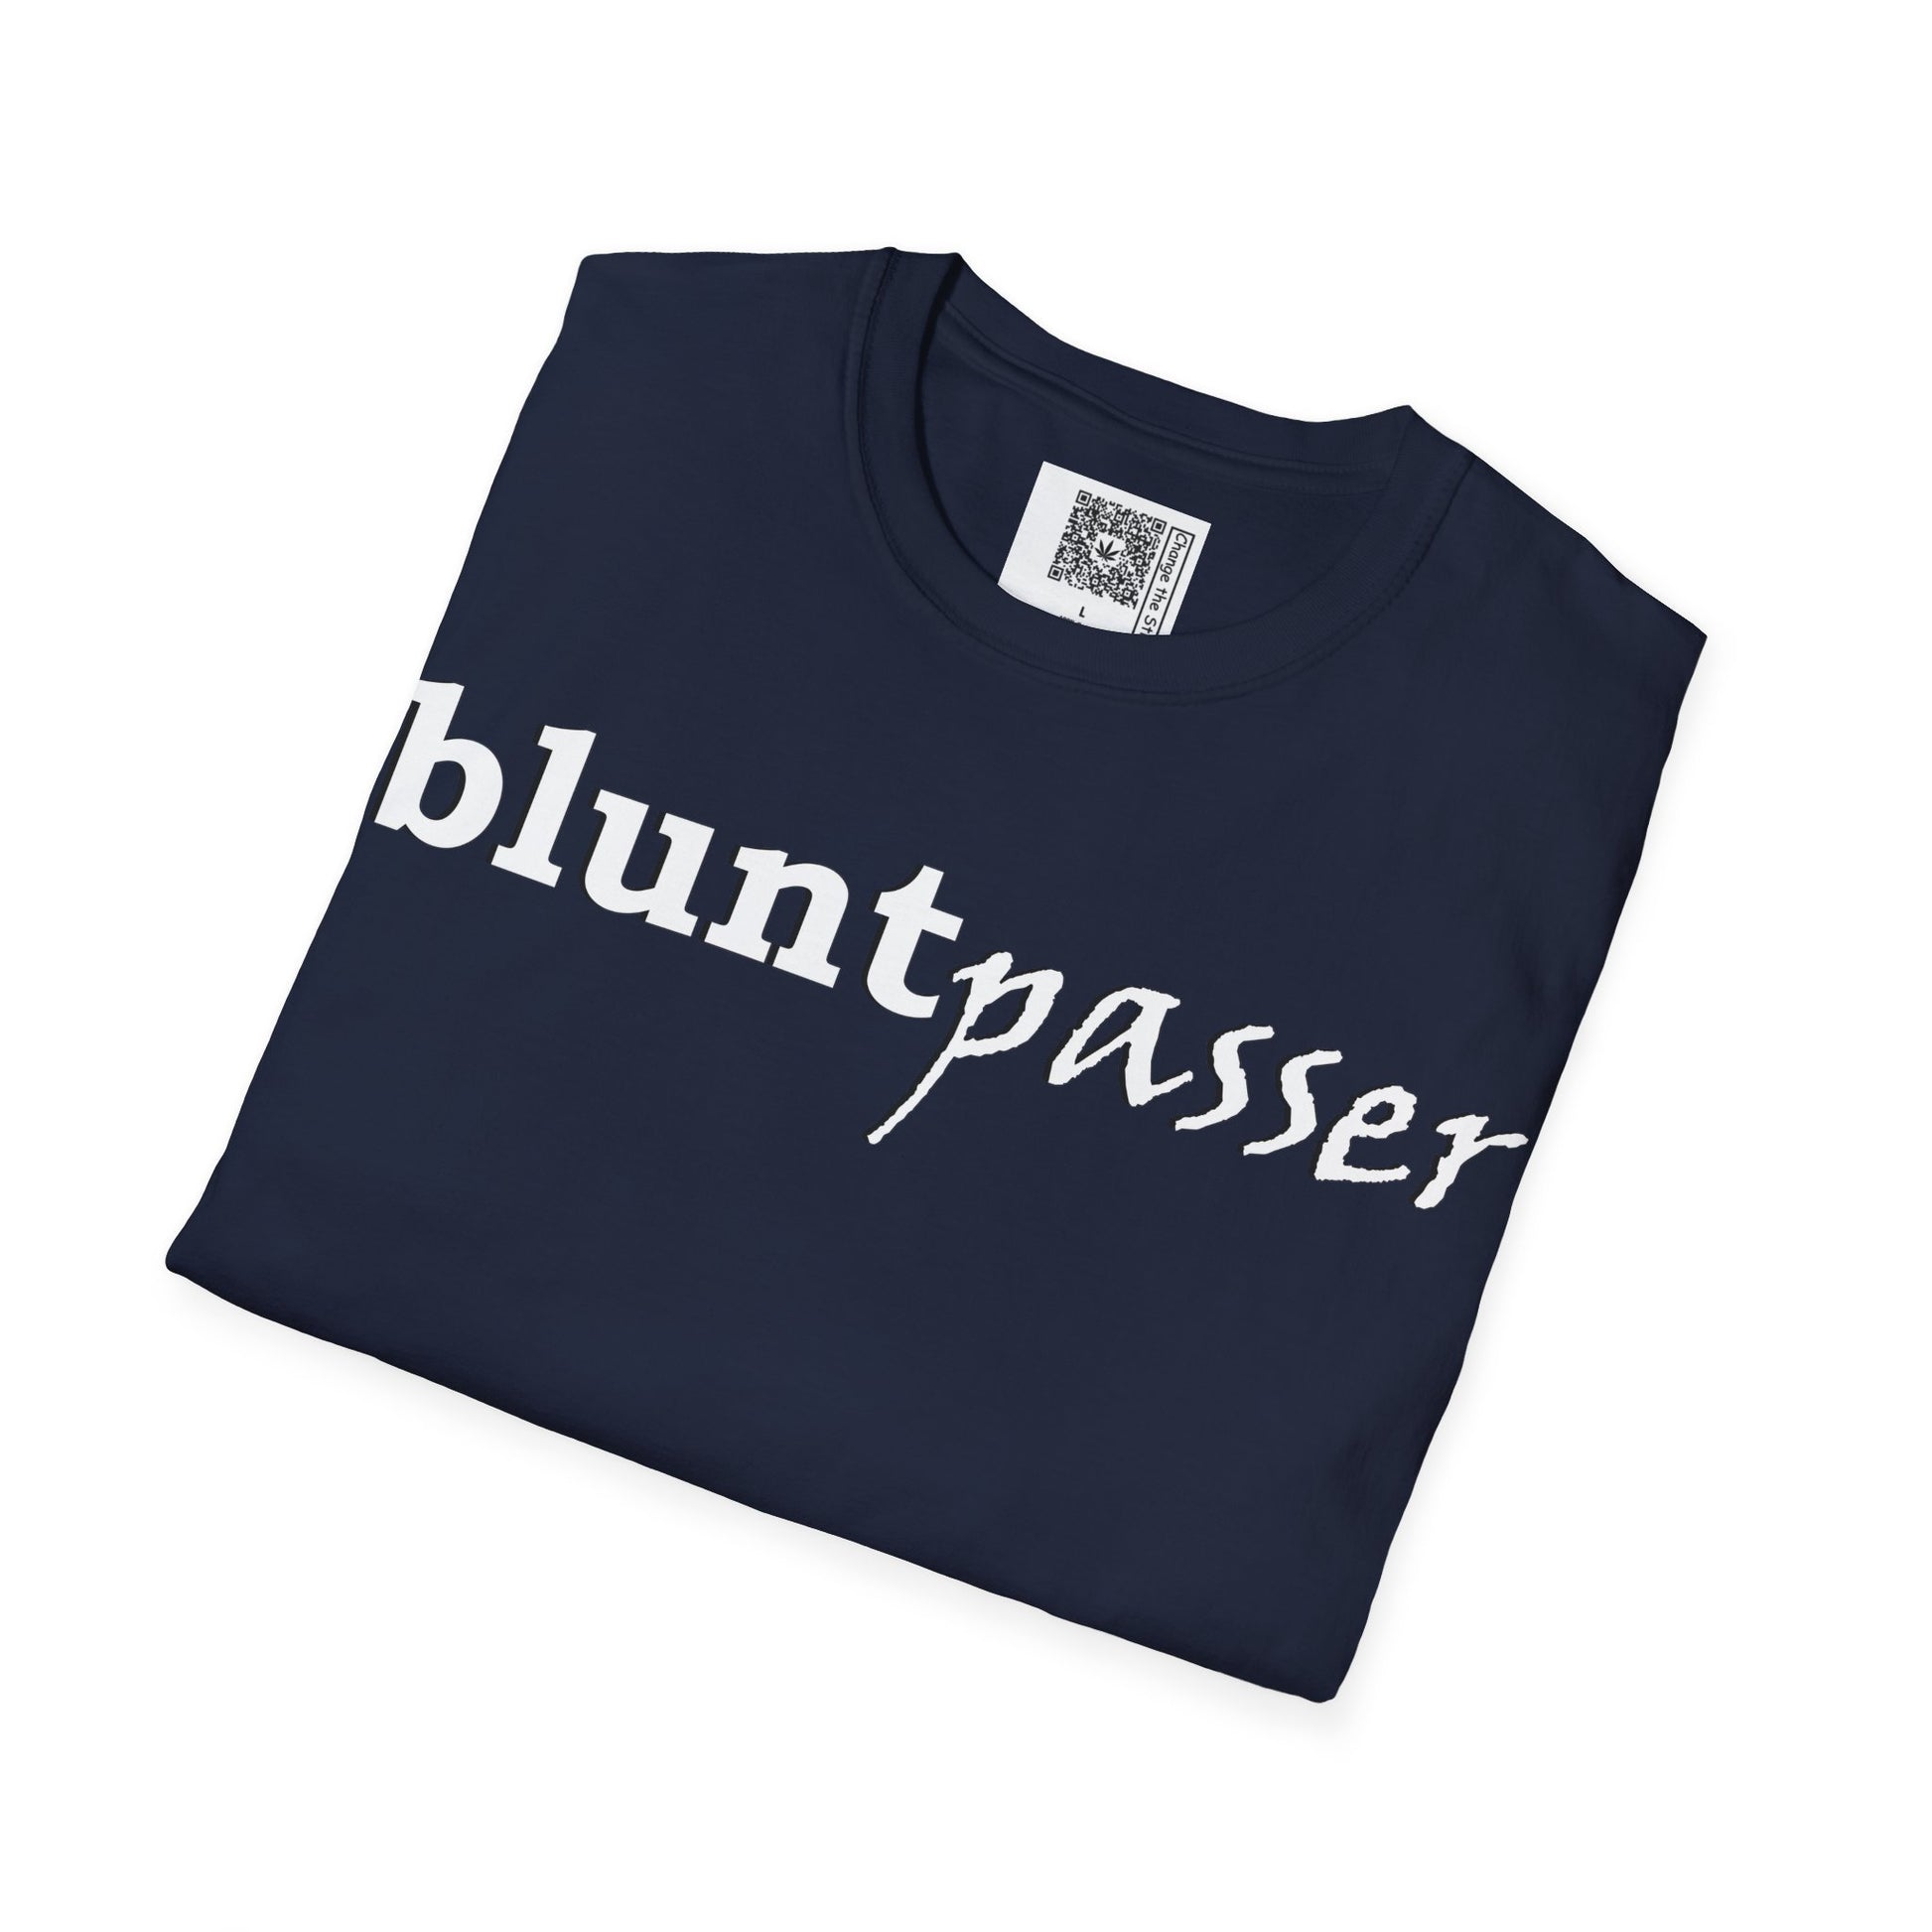 Change the Stigma, Navy color, shirt saying "blunt passer", Folded, Qr code is shown